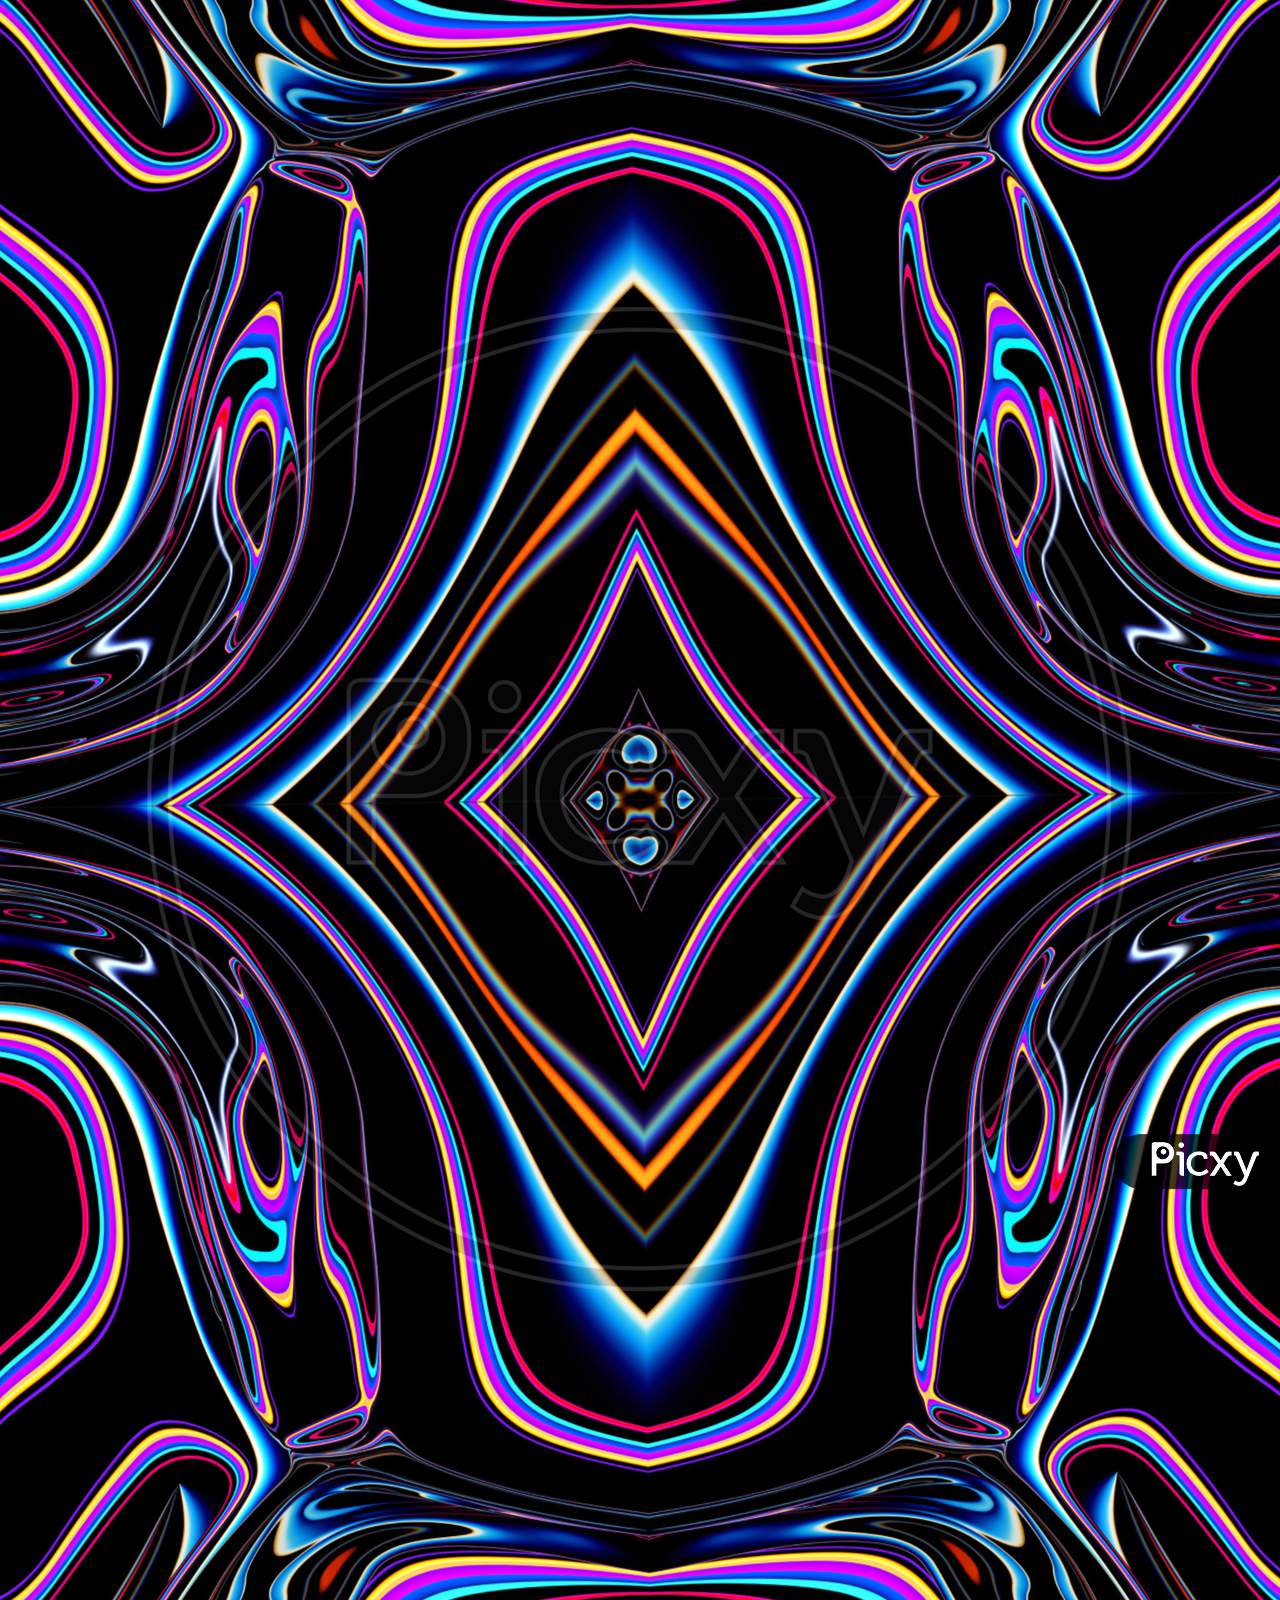 A creative 3d design abstracts design background